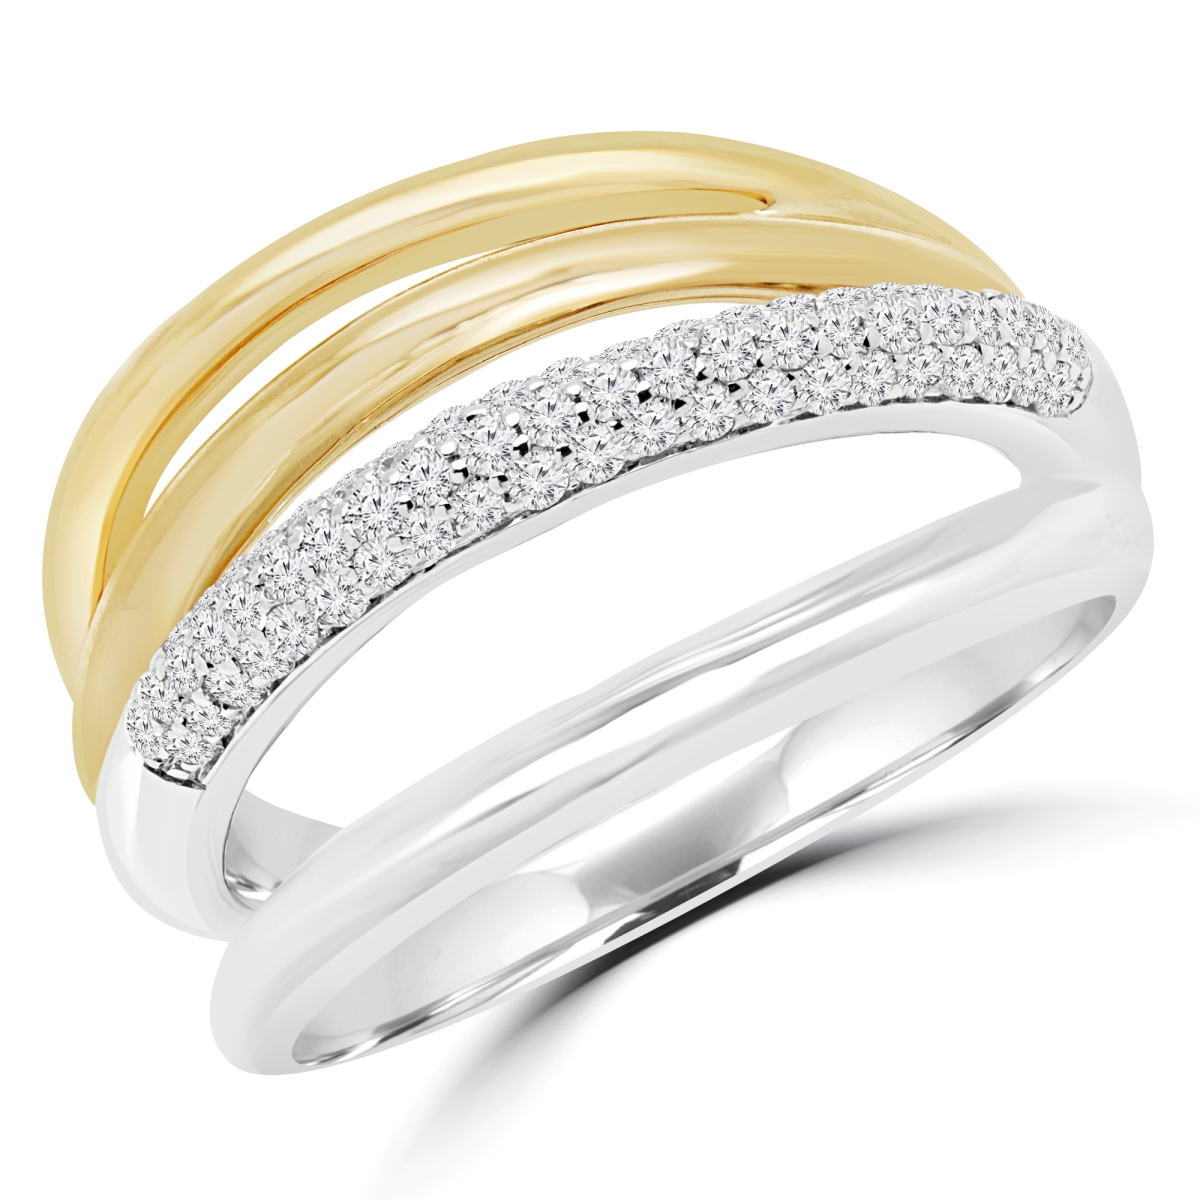 Picture for category Two-Tone Diamond Rings